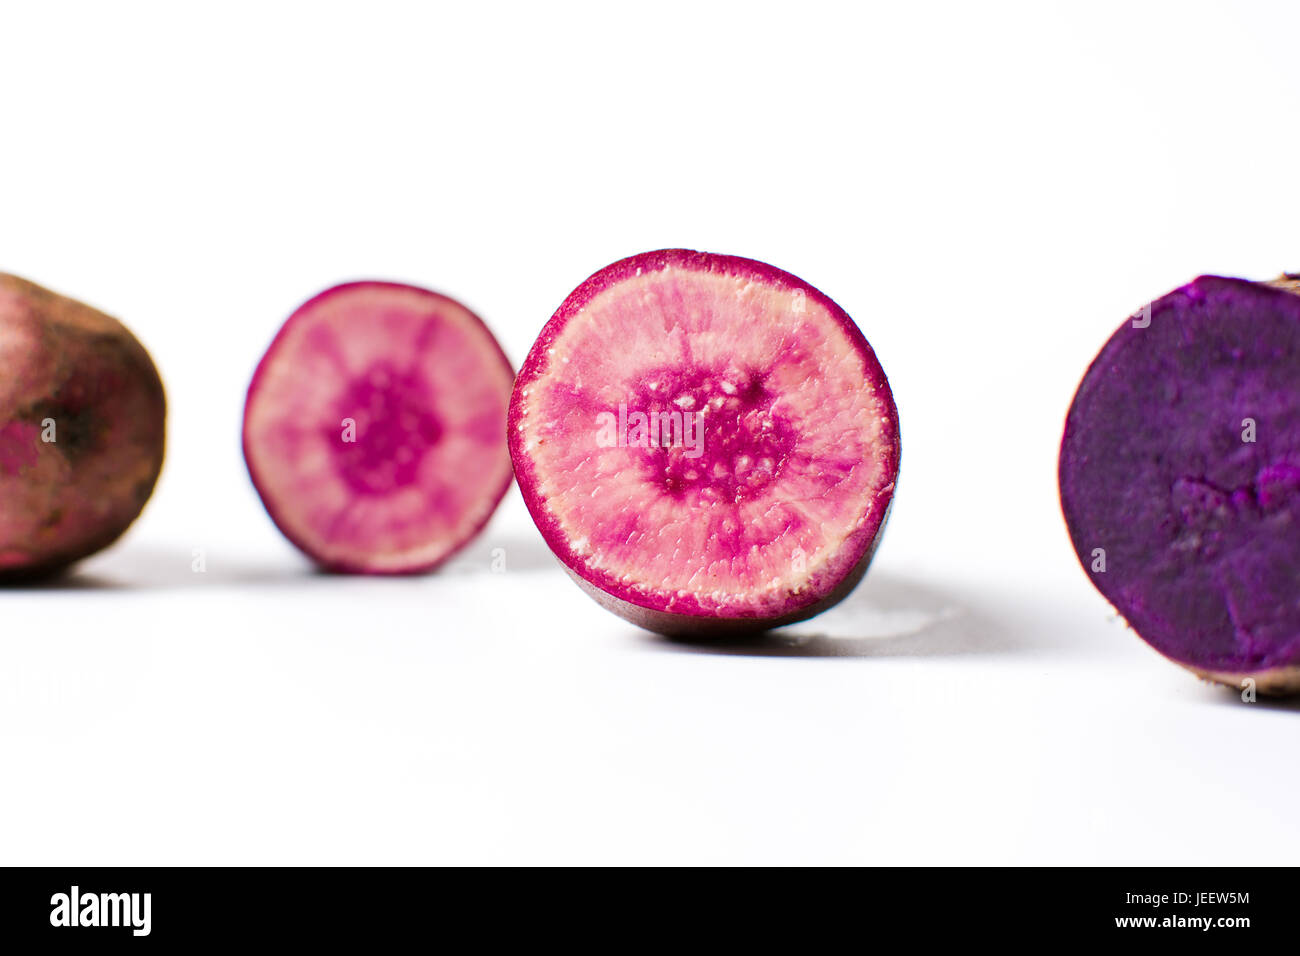 Purple potatoes isolated on white background. Healthy food Stock Photo